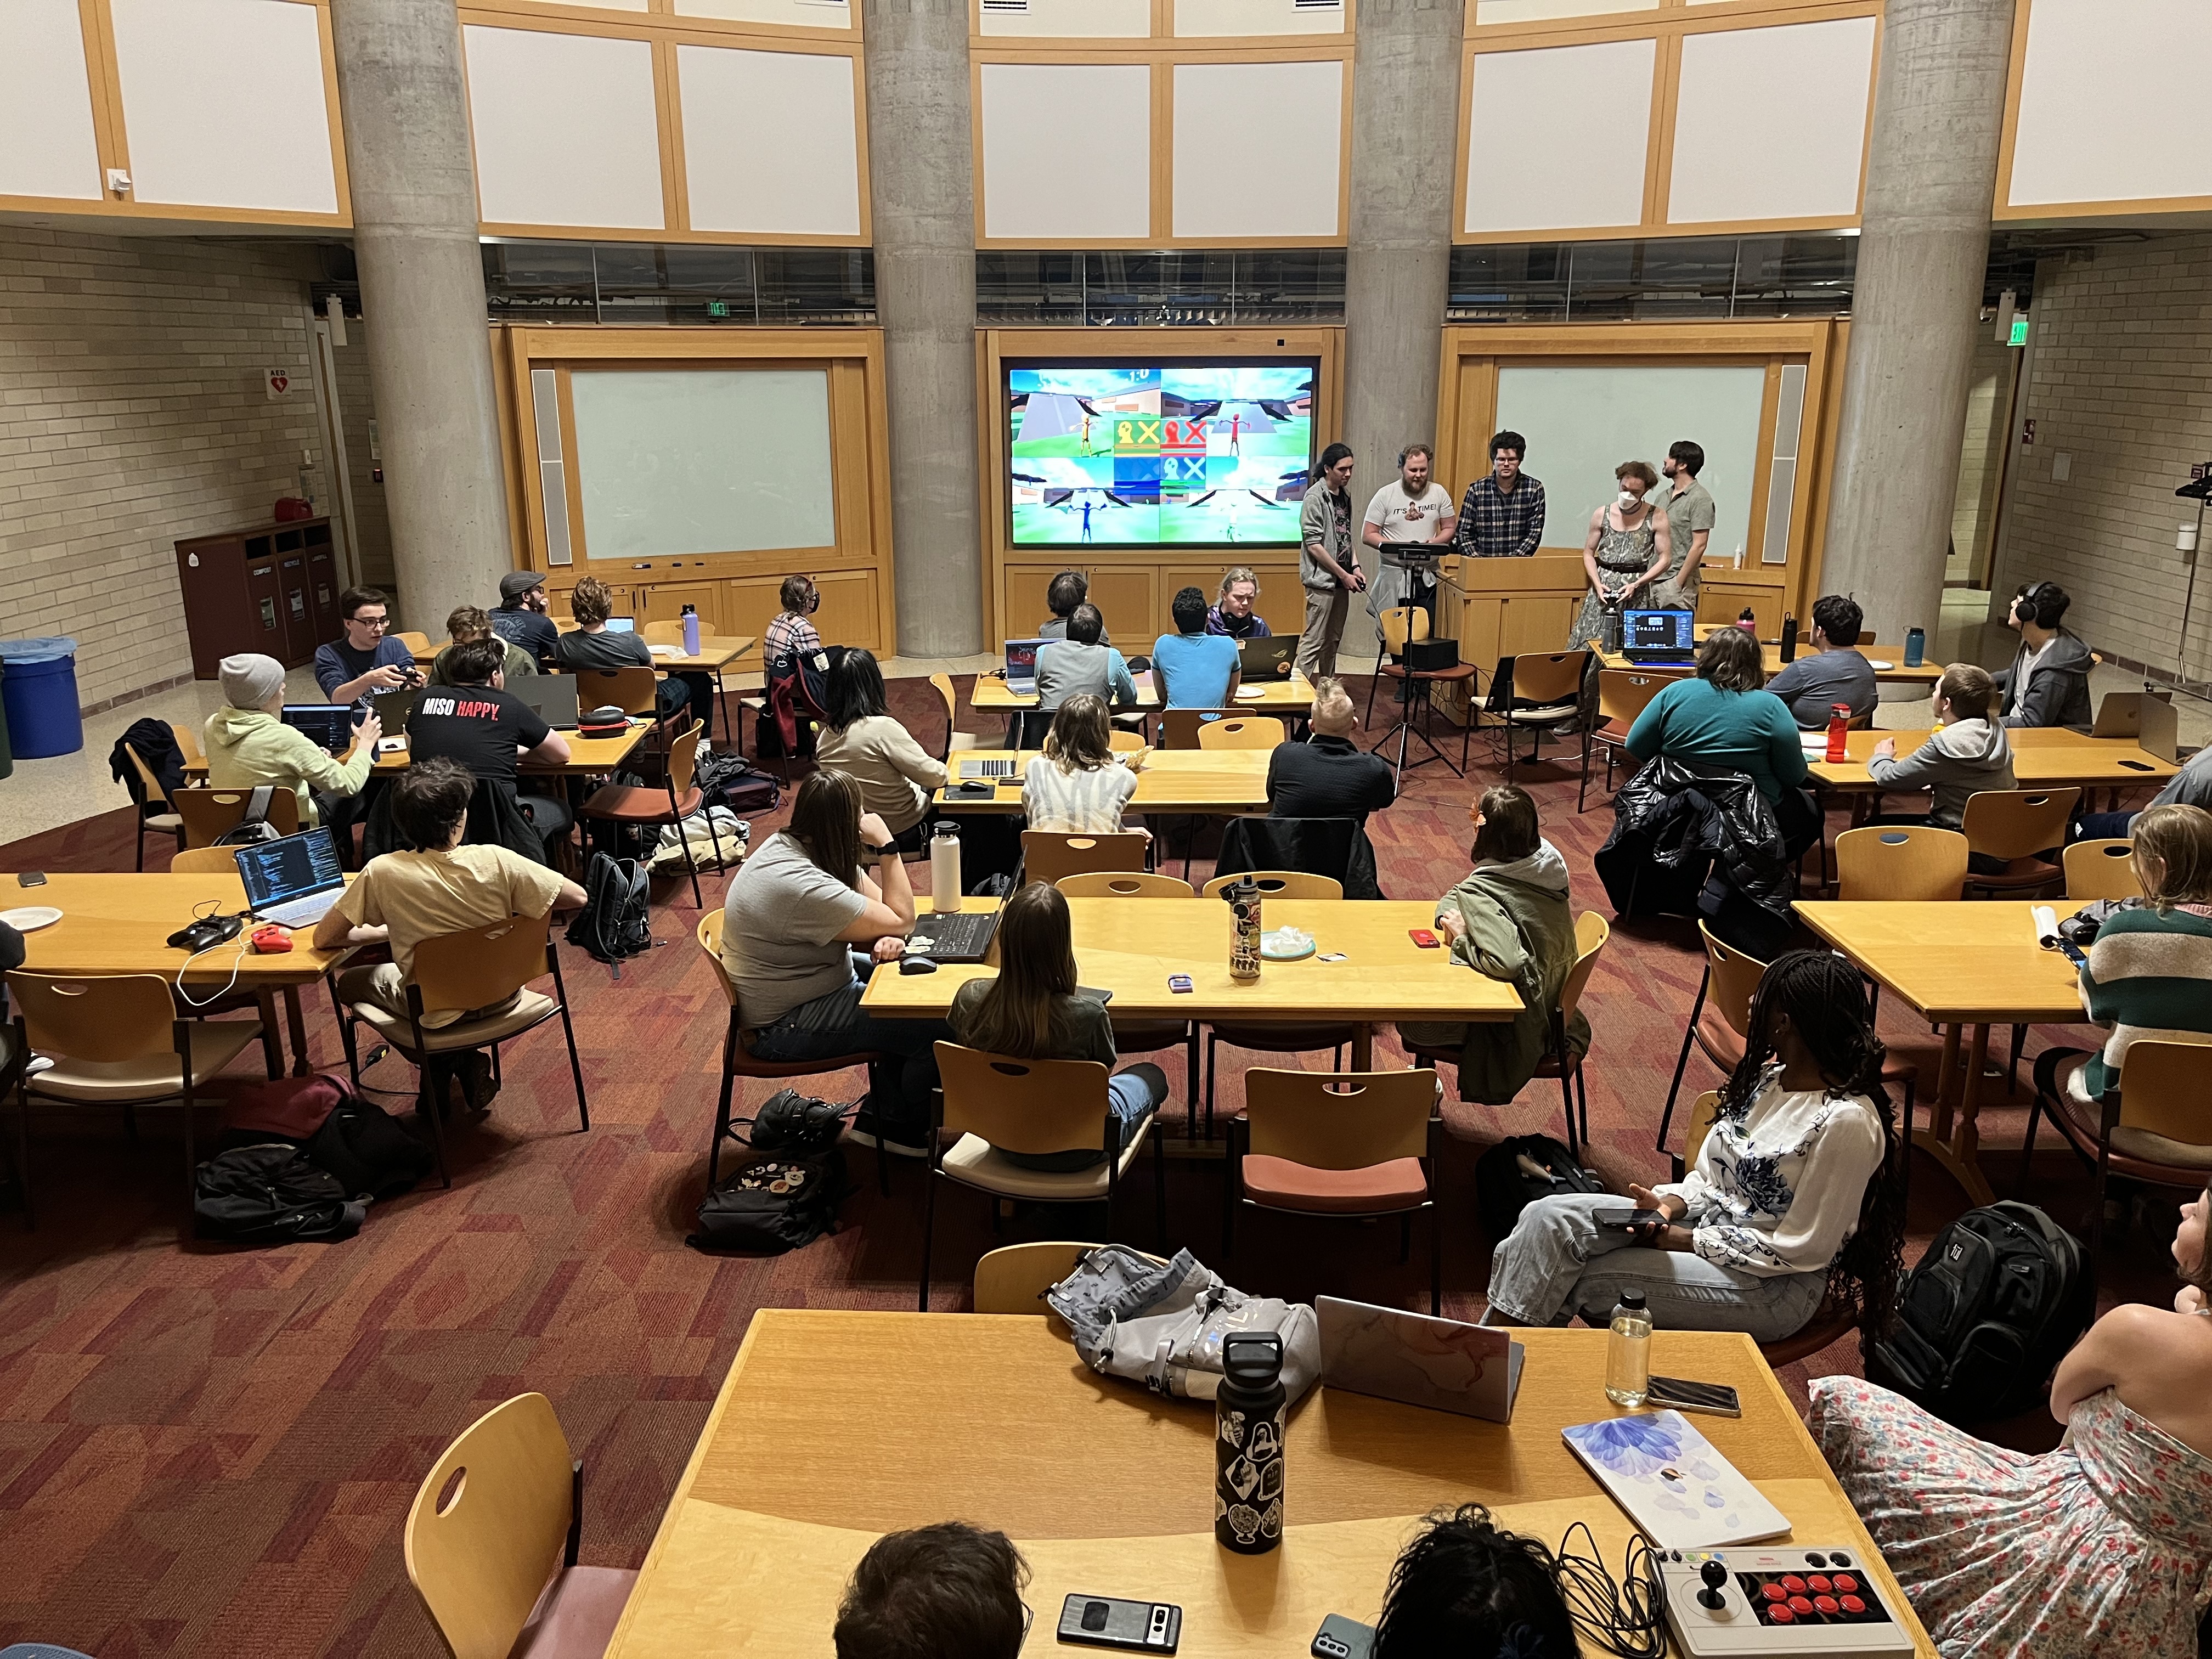 Students competing in the global game jam at the Ritchie School